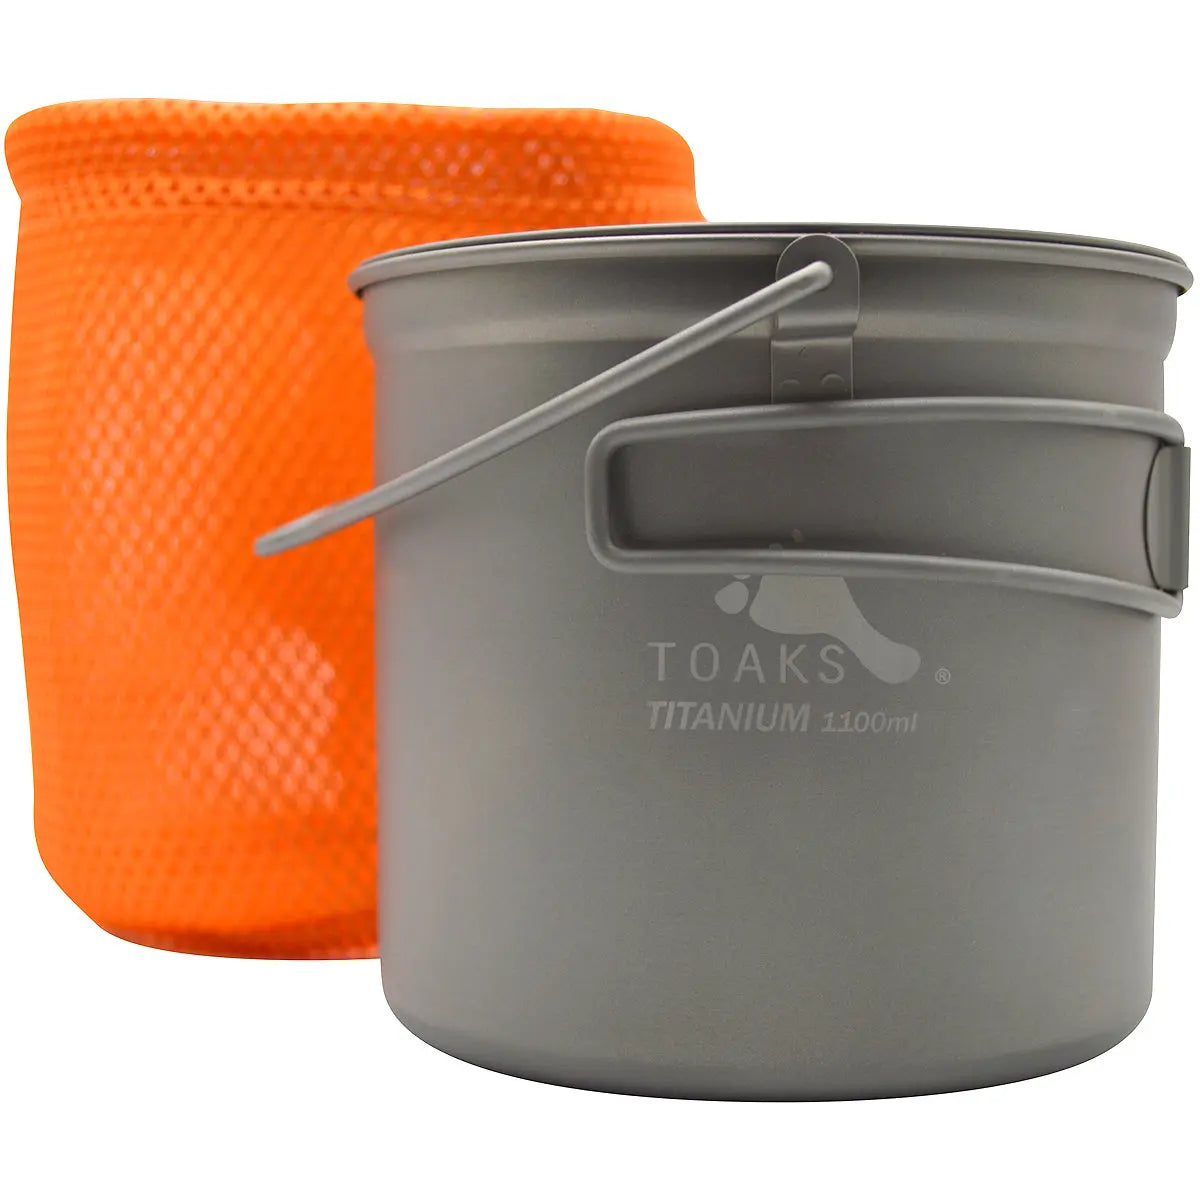 TOAKS 1100ml Titanium Camping Cooking Pot with Bail Handle and Lockable Lid TOAKS